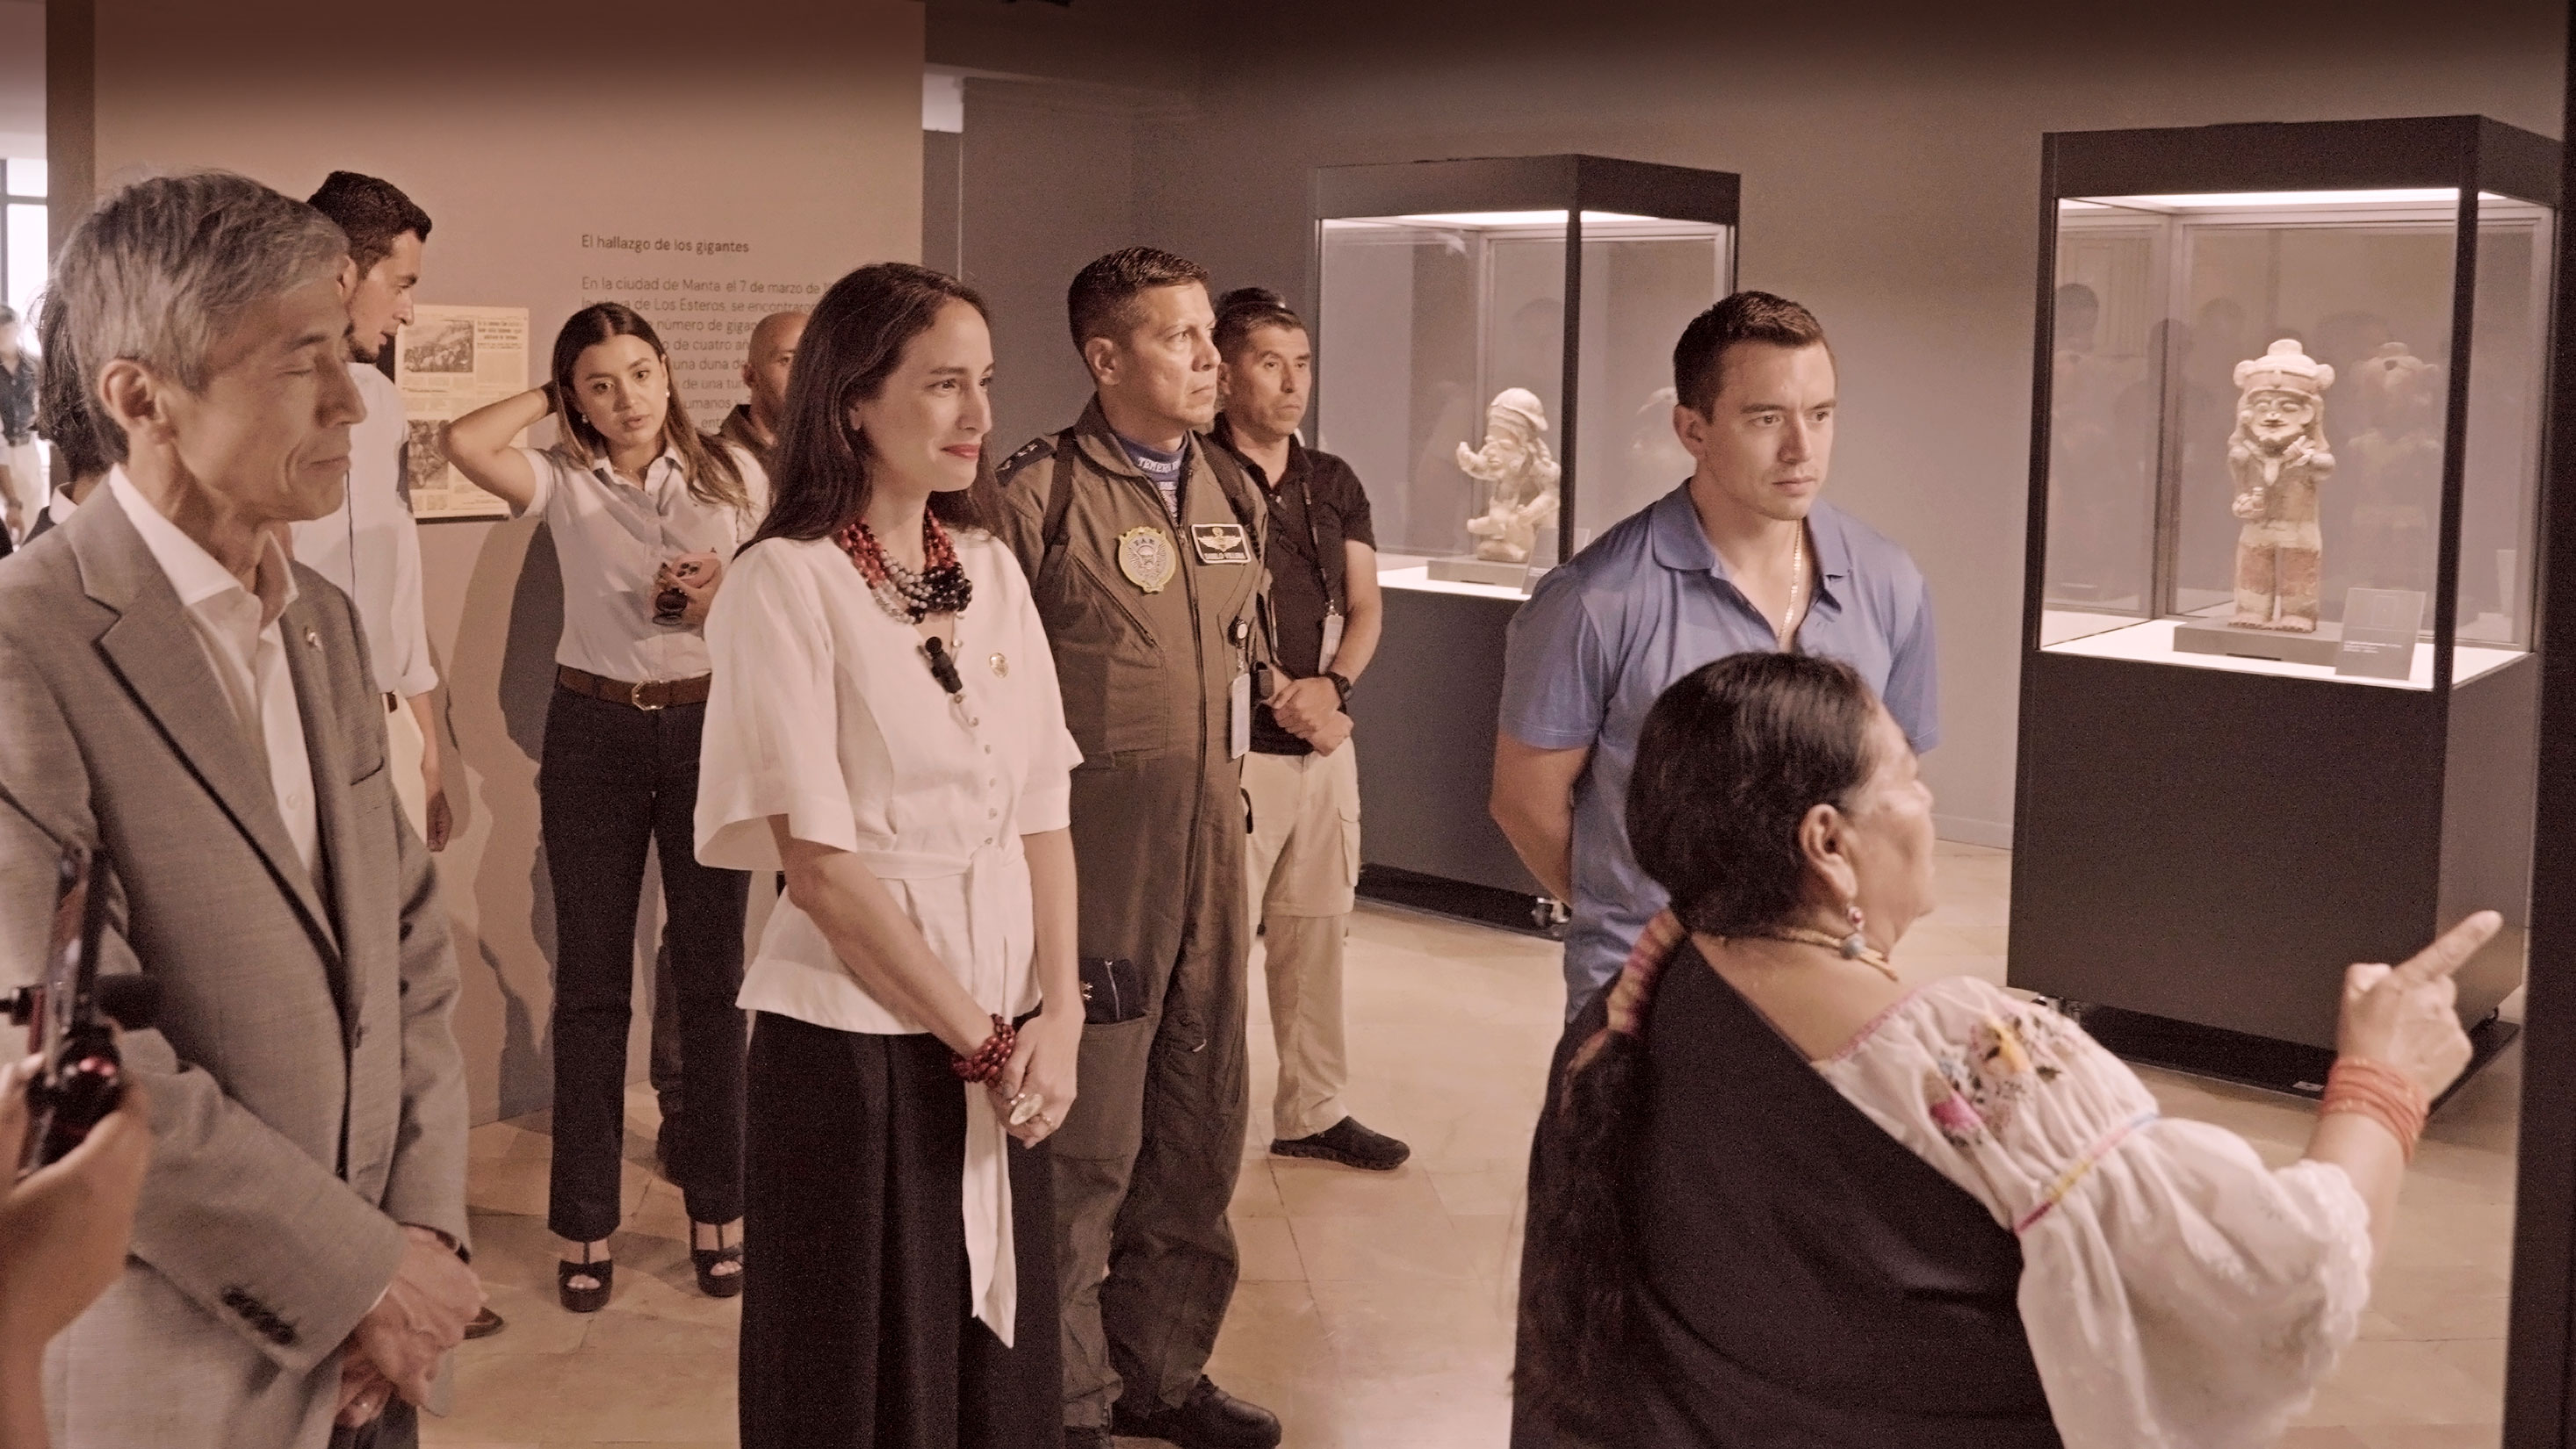 President Noboa (back right) listening to an explanation of the exhibits at the Manta National Museum and Cultural Center